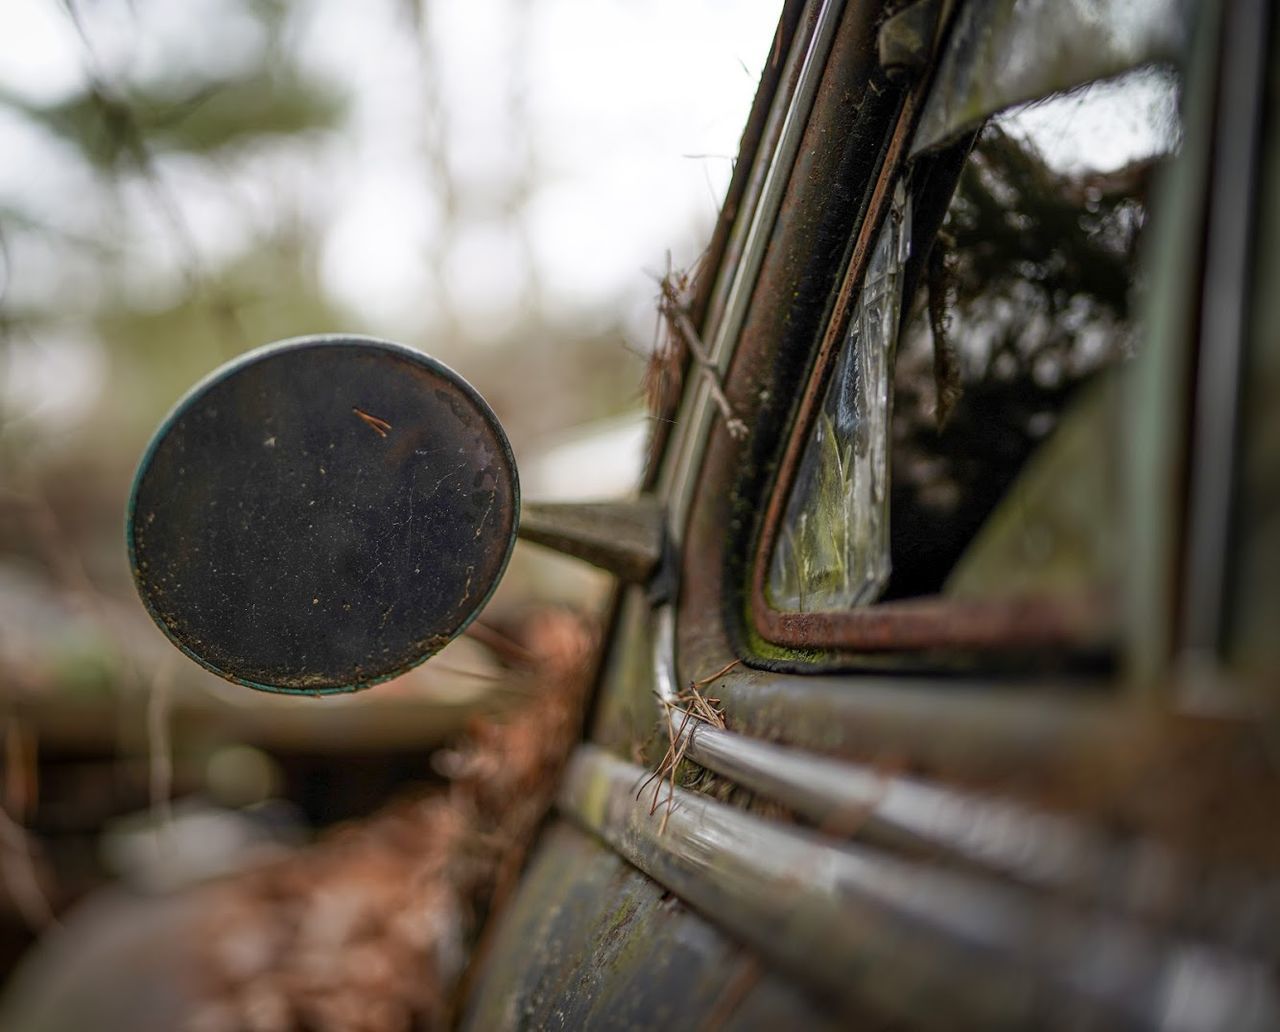 CLOSE-UP OF OLD RUSTY CAR ON METAL